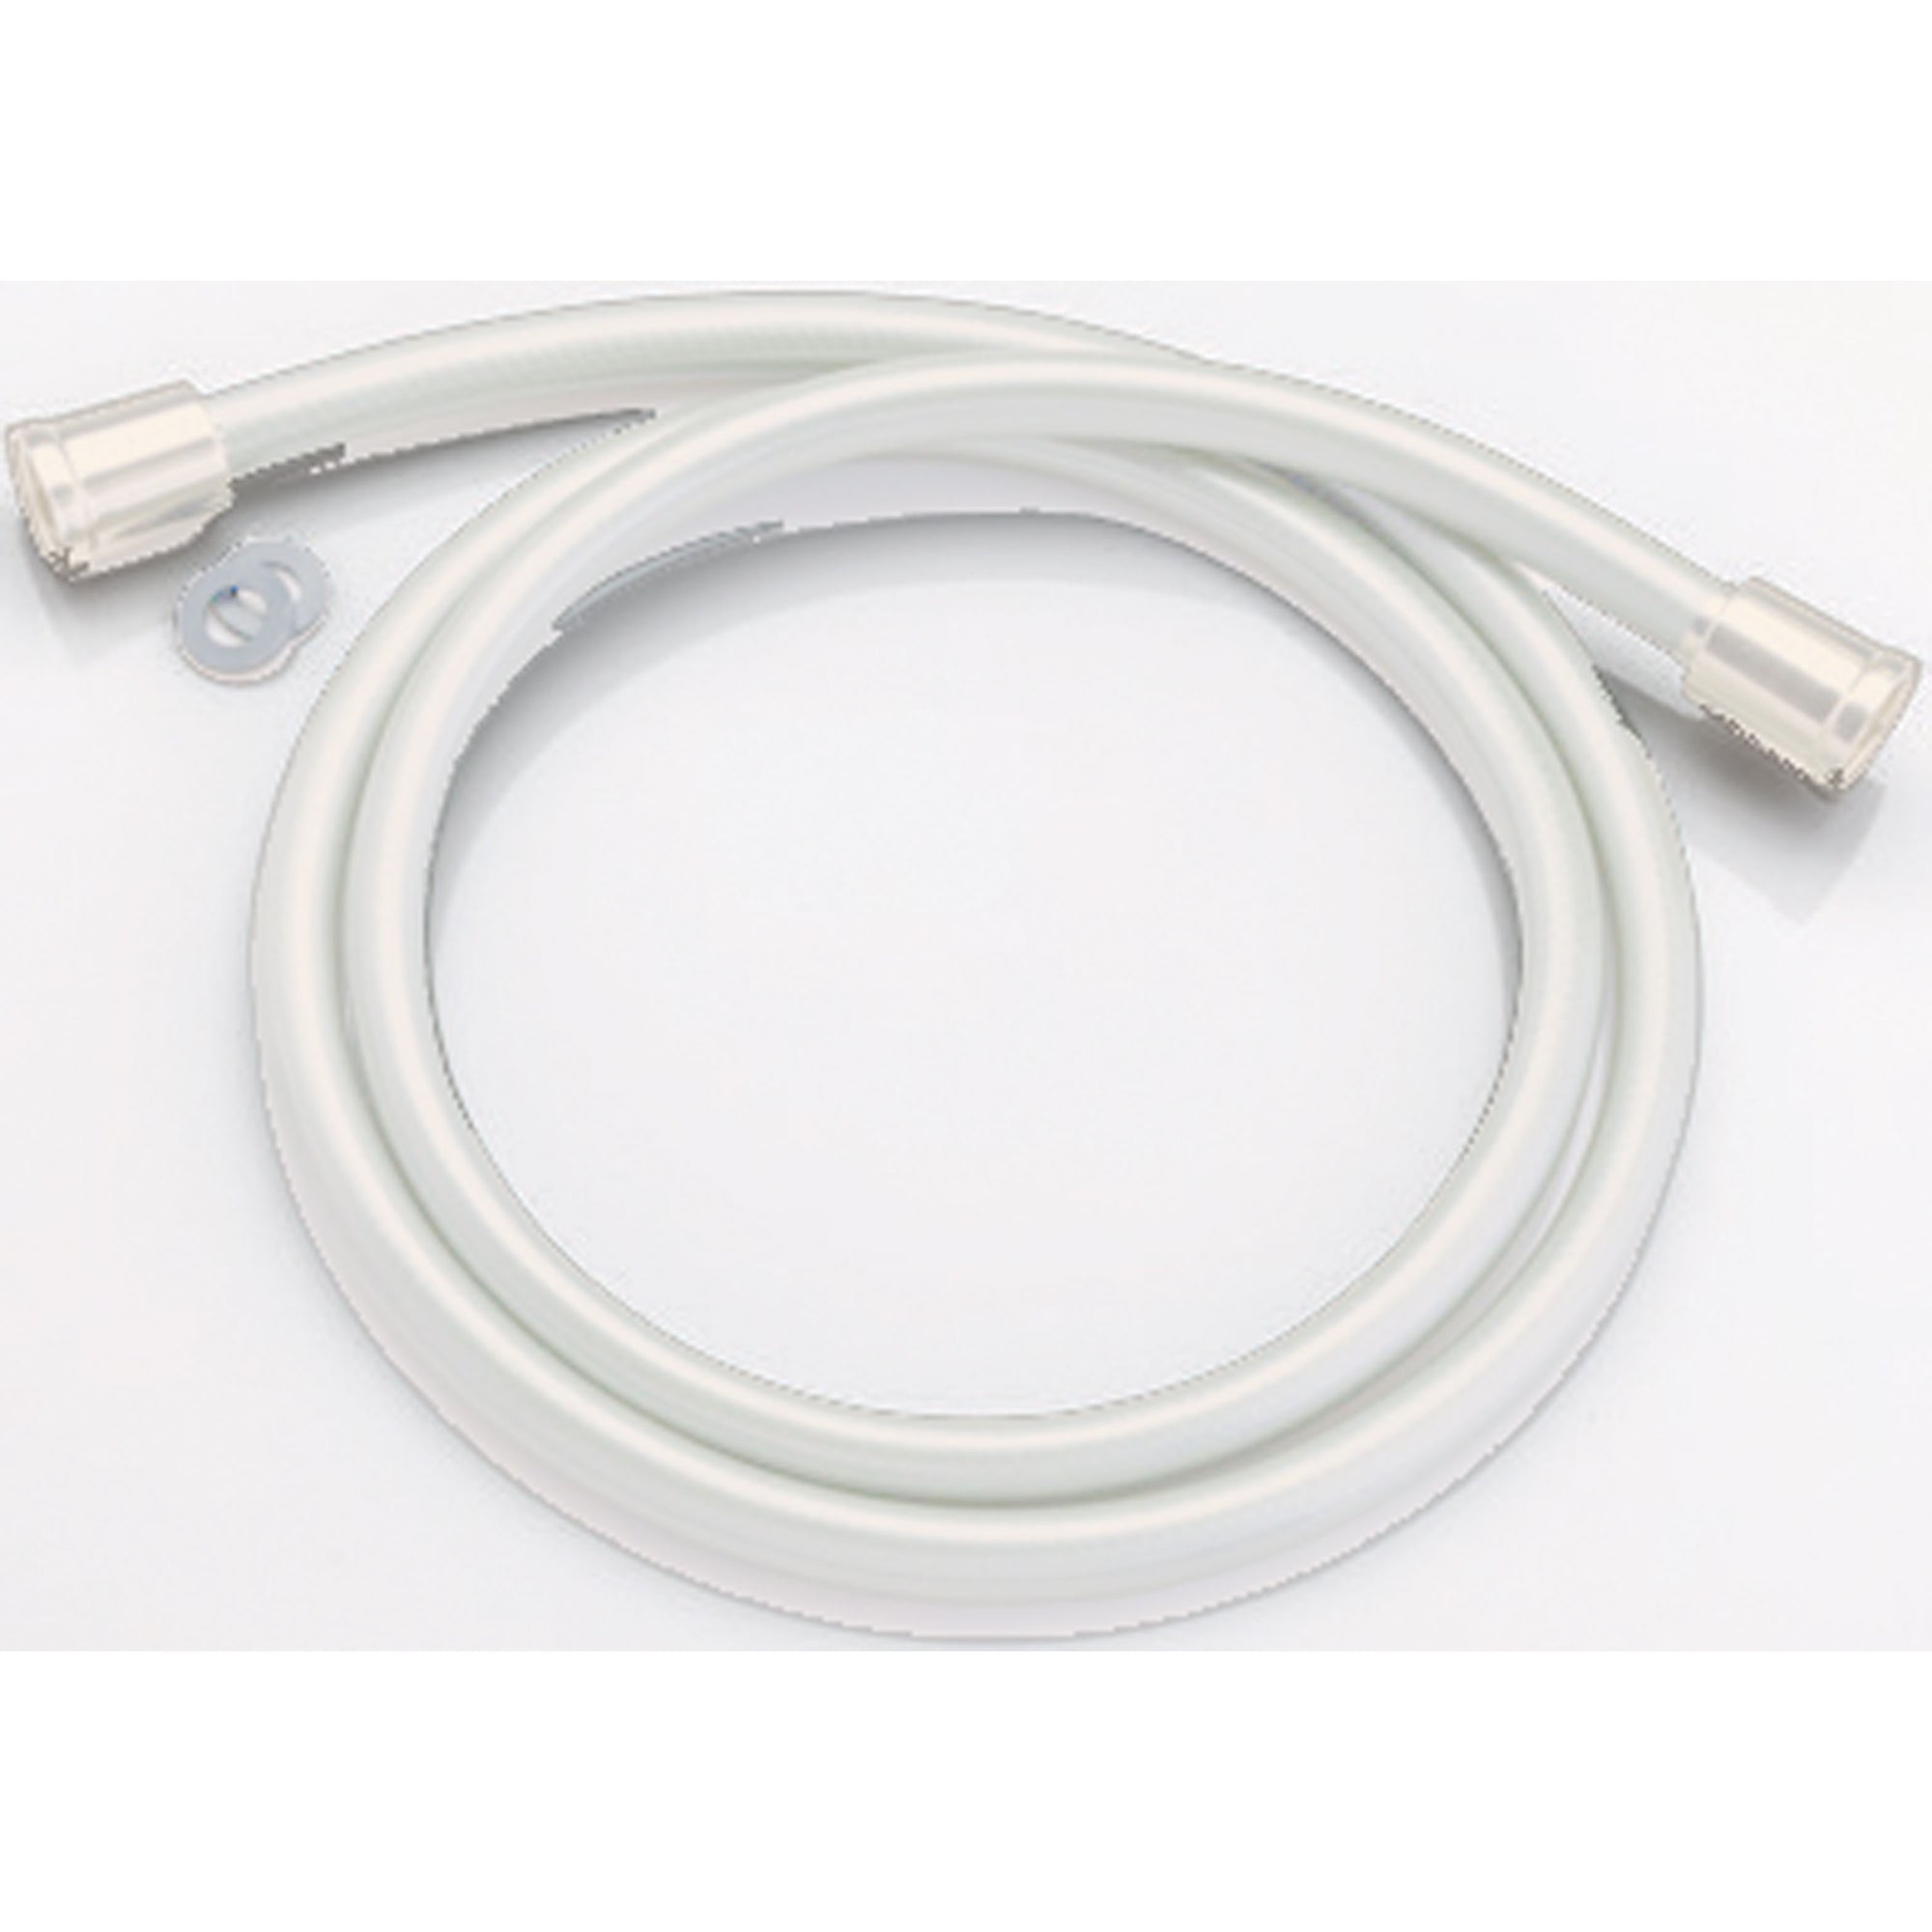 Empire Brass CRD-U-HS60W Hose Kit Deluxe - 60 in., White